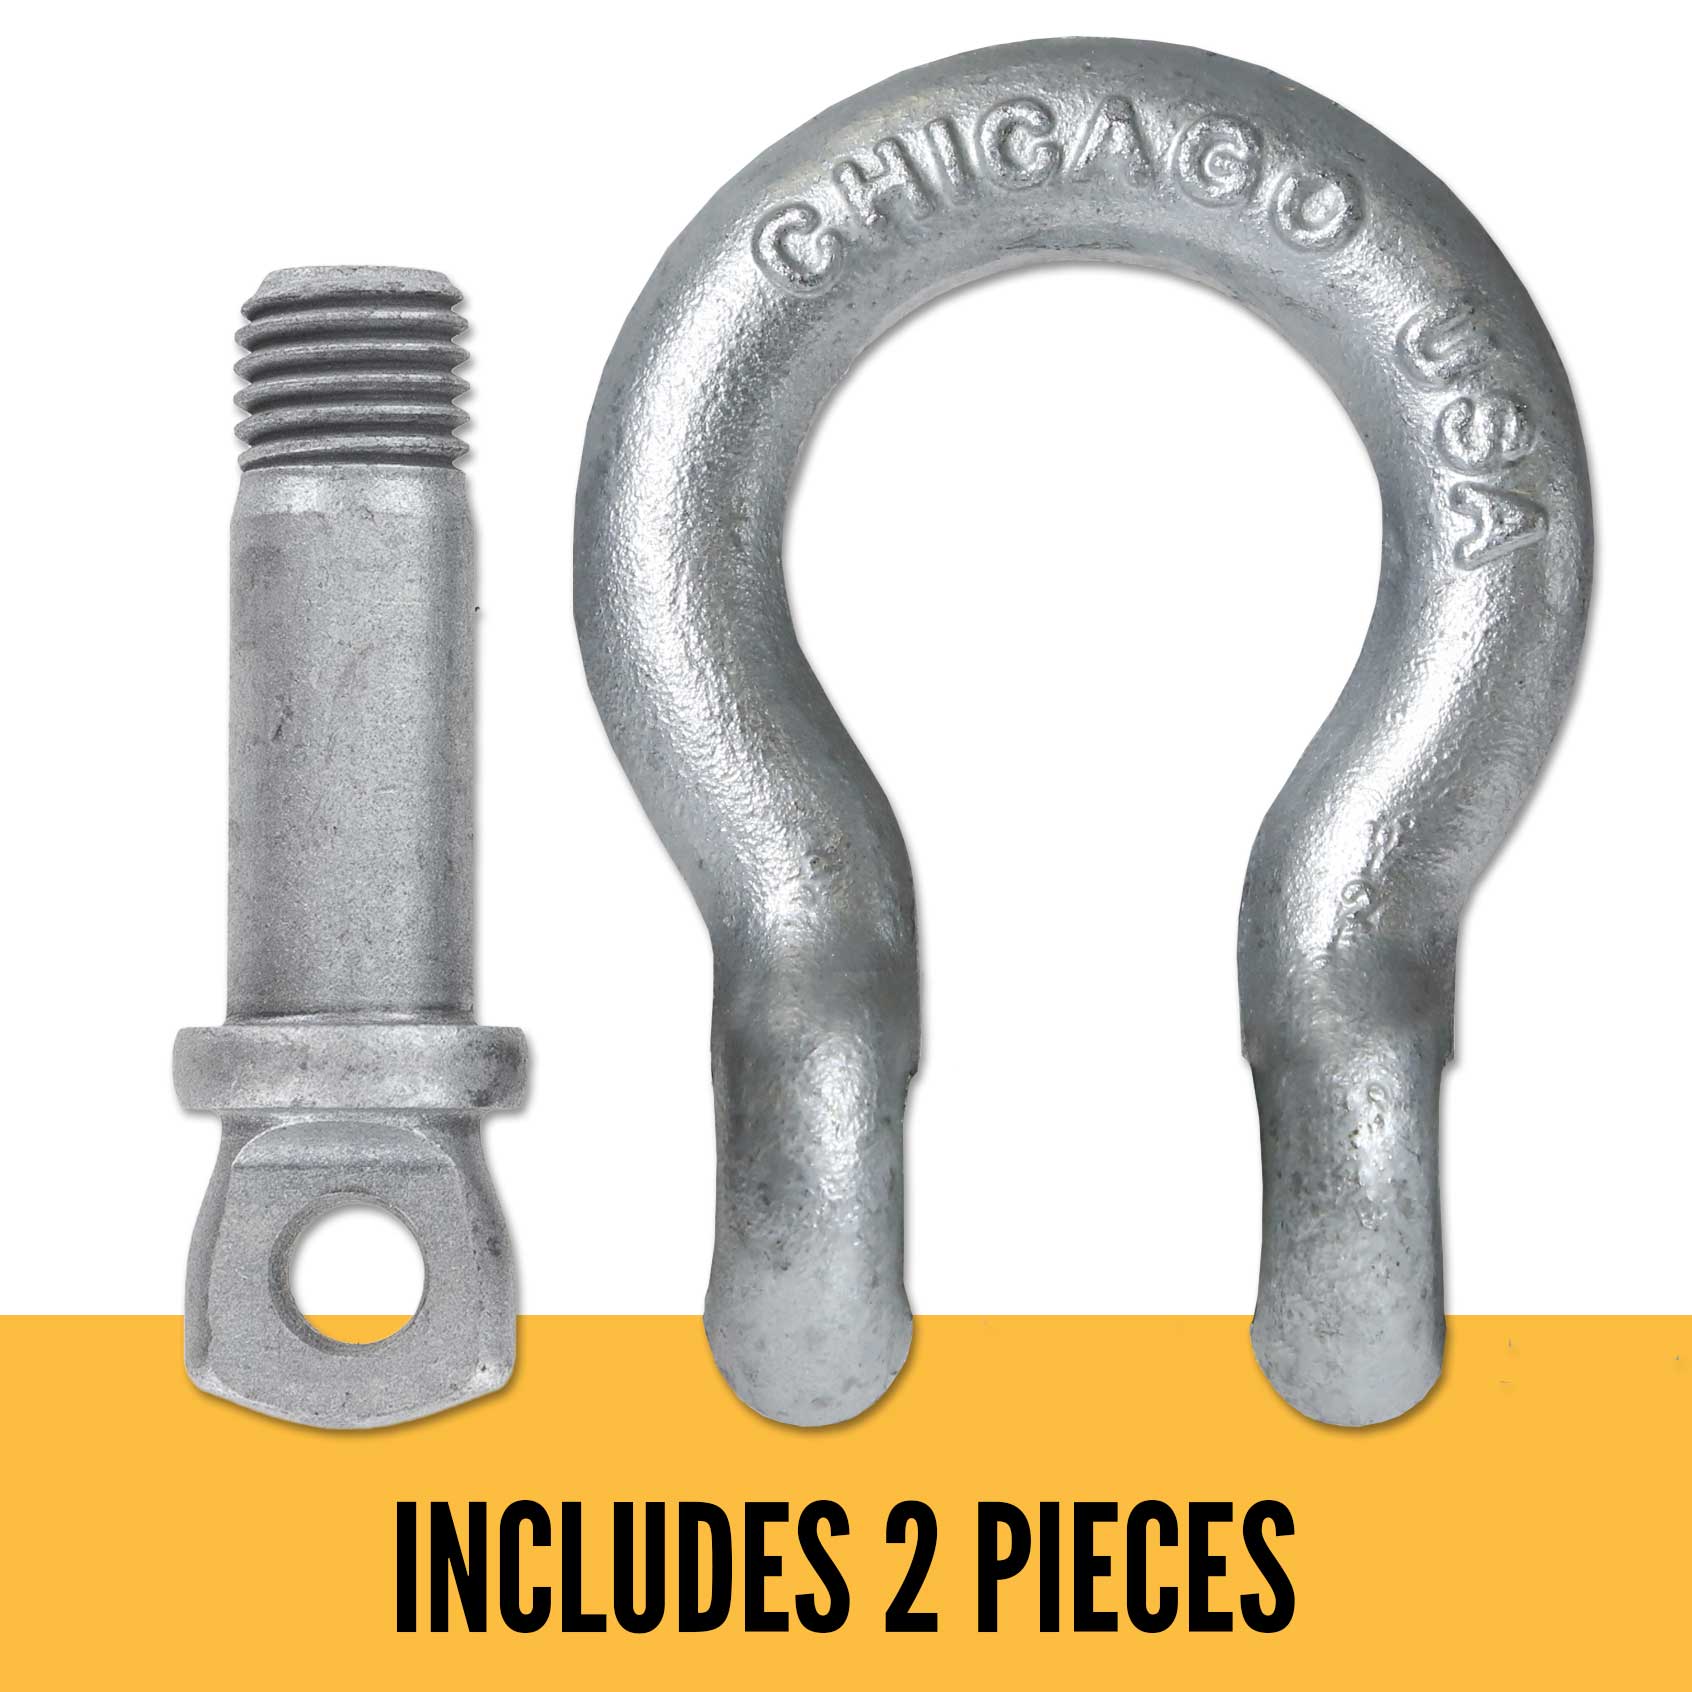 Screw Pin Anchor Shackle - Chicago Hardware - 5/16" Galvanized Steel - .75 Ton parts of a shackle